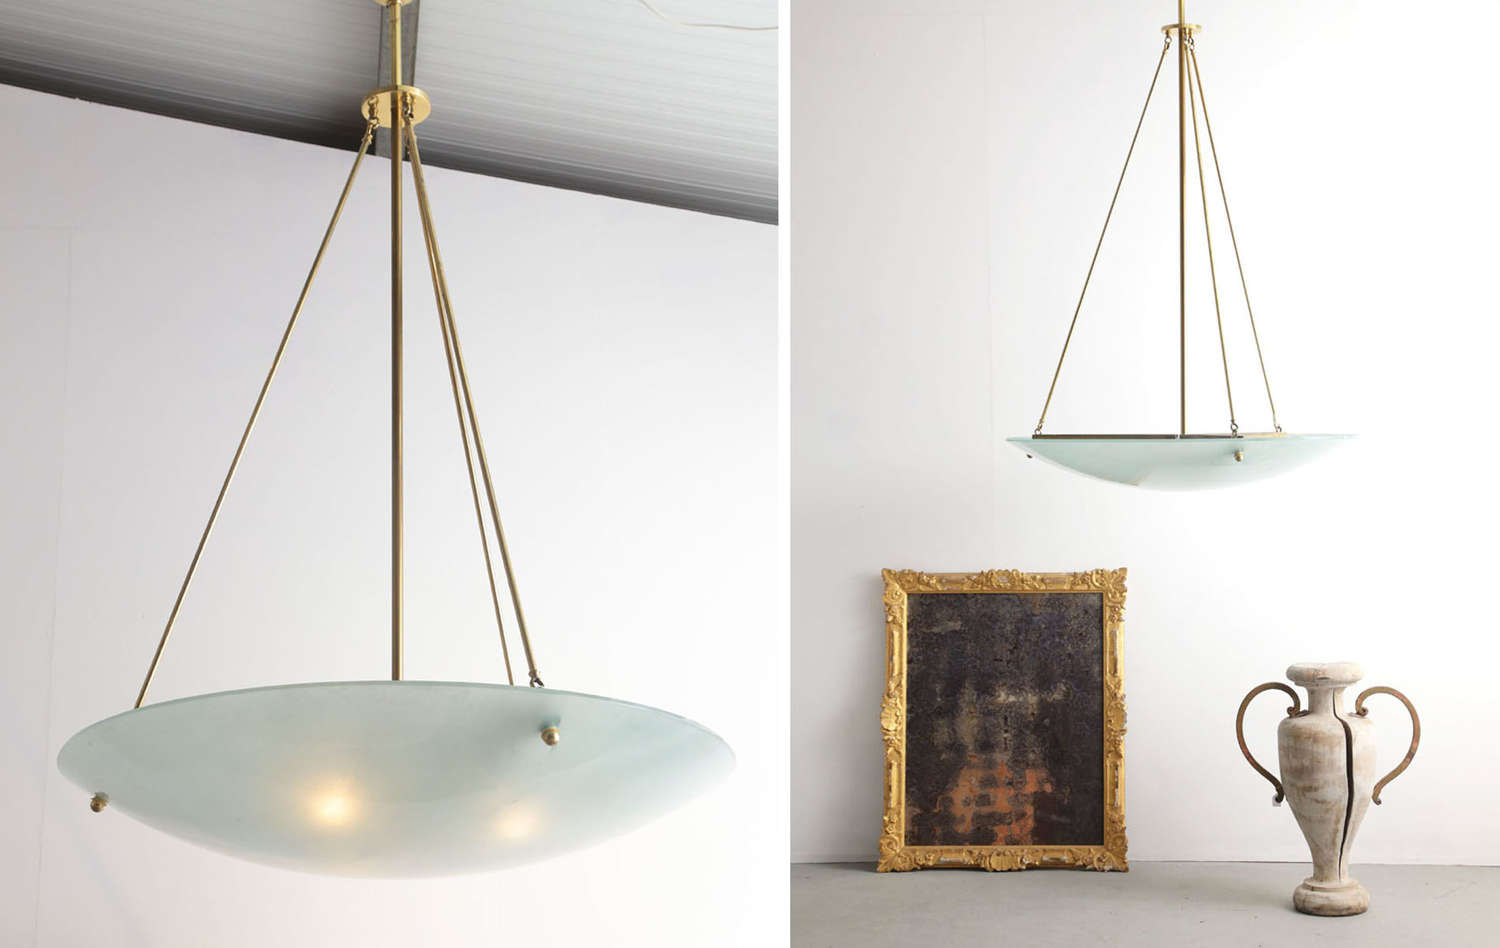 20th century French grande suspension ceiling light